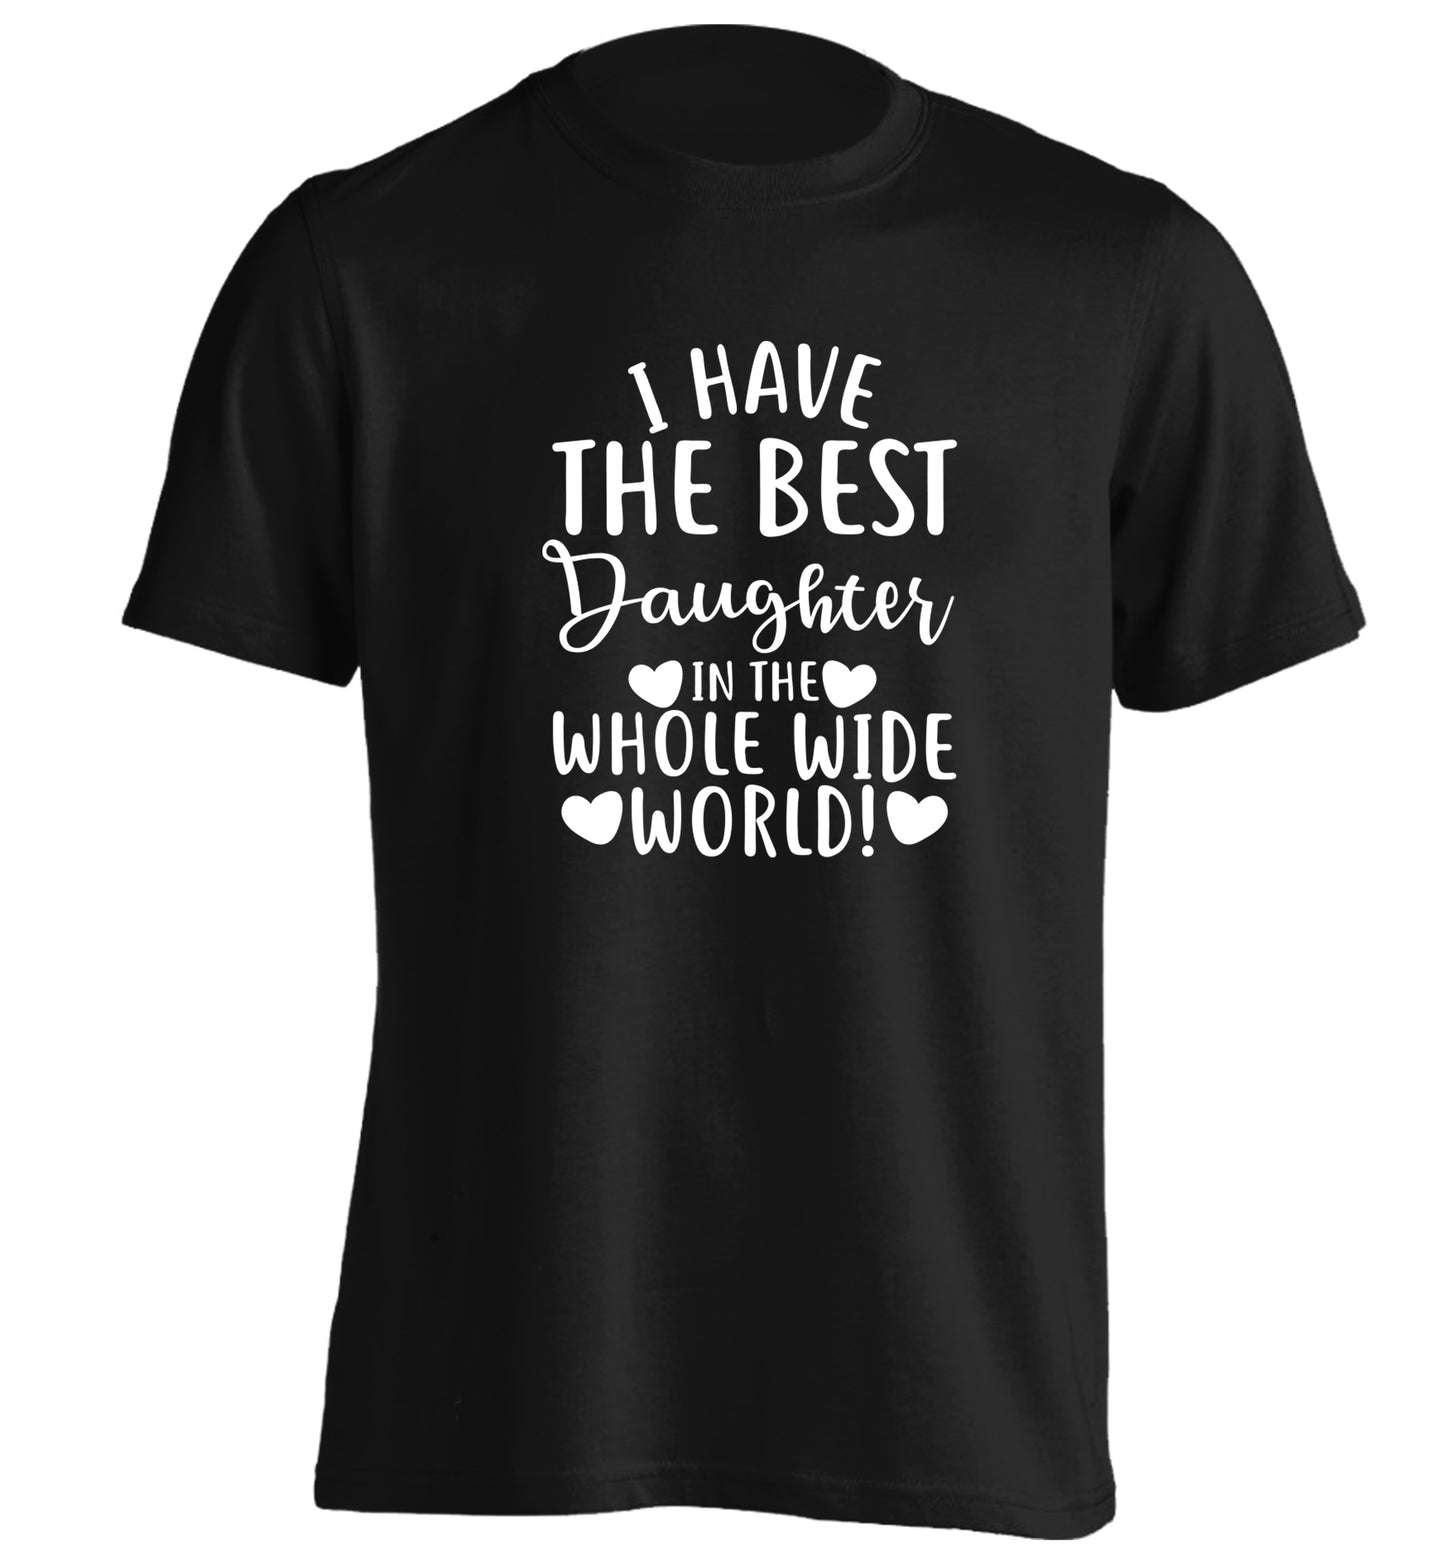 I have the best daughter in the whole wide world! adults unisex black Tshirt 2XL